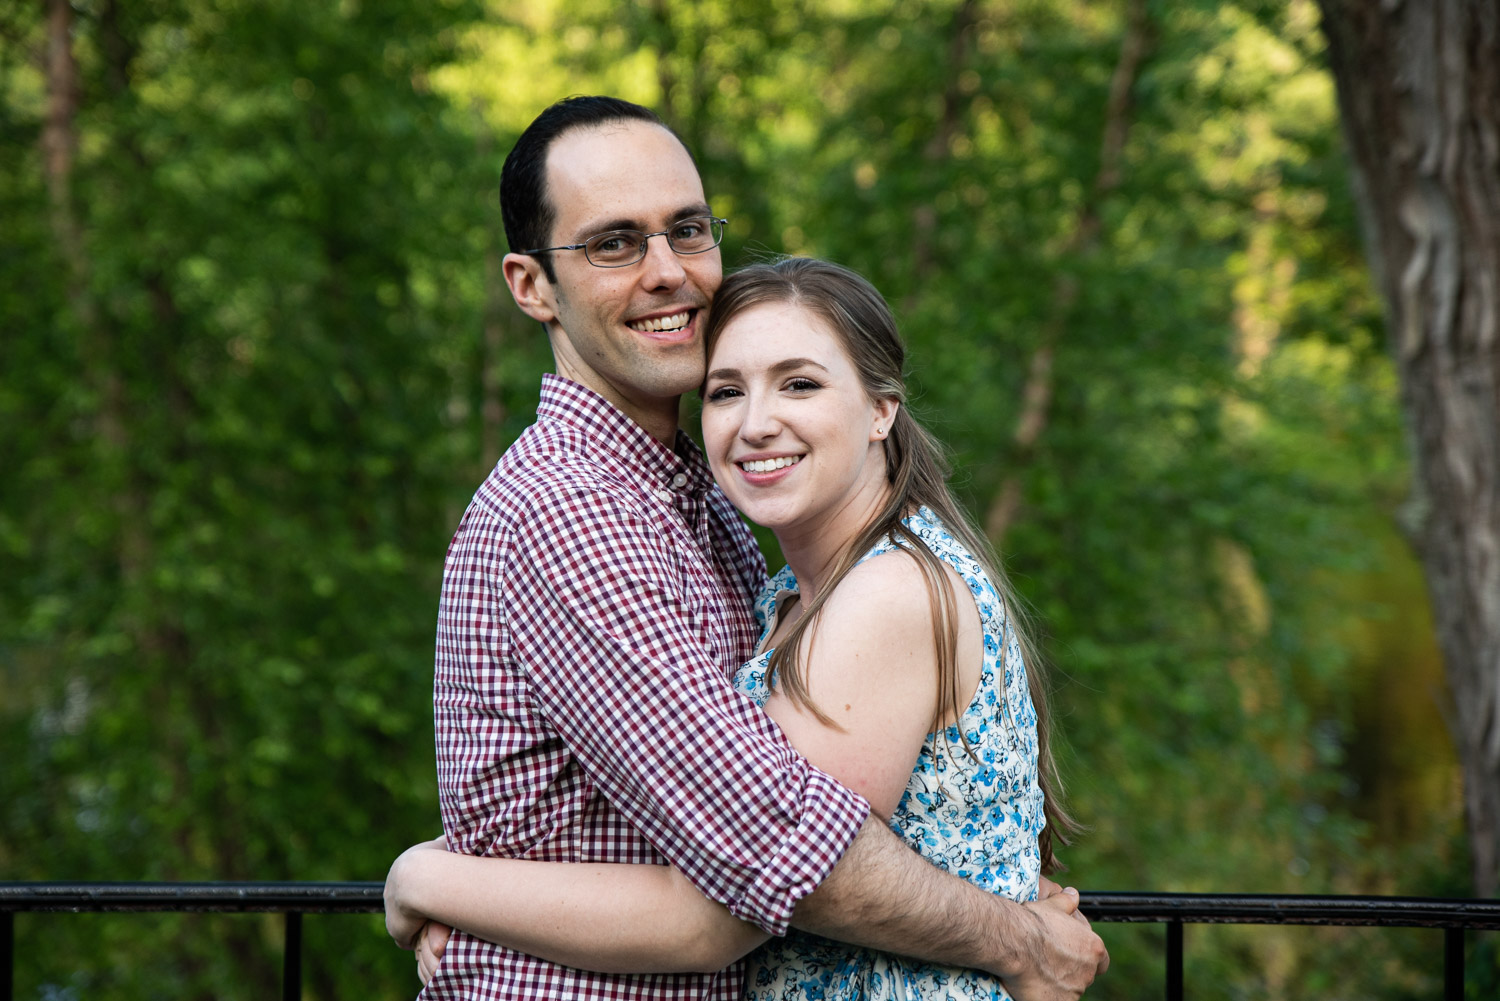 Heather and Chuck engagement at Old North Bridge, Concord, MA photographed by Kara Emily Krantz Photography.